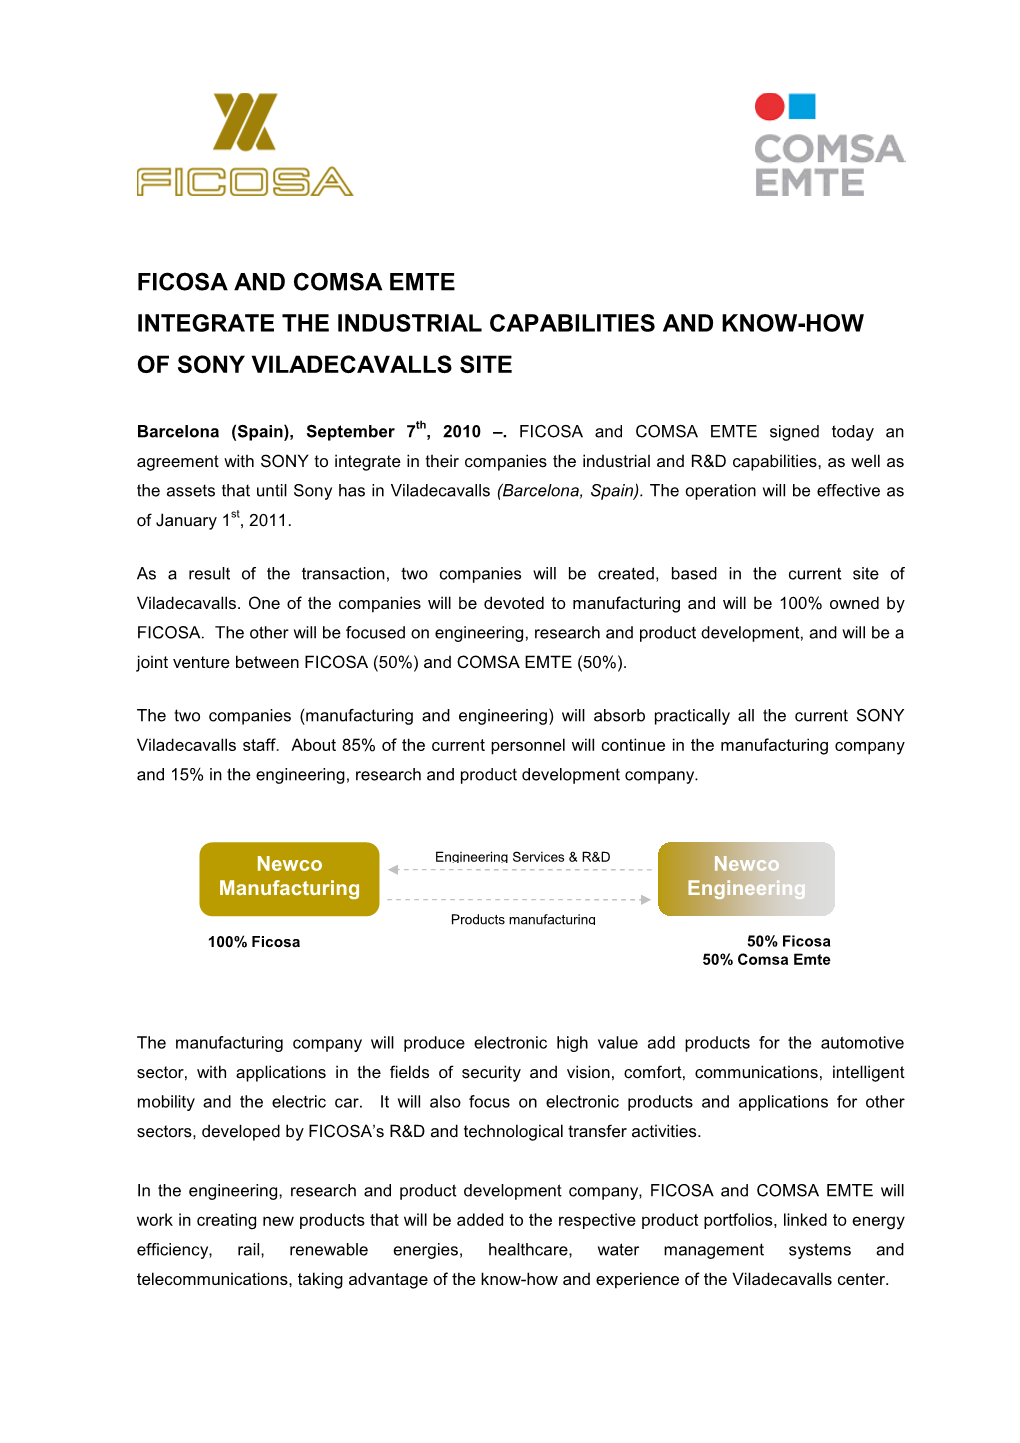 Ficosa and Comsa Emte Integrate the Industrial Capabilities and Know-How of Sony Viladecavalls Site